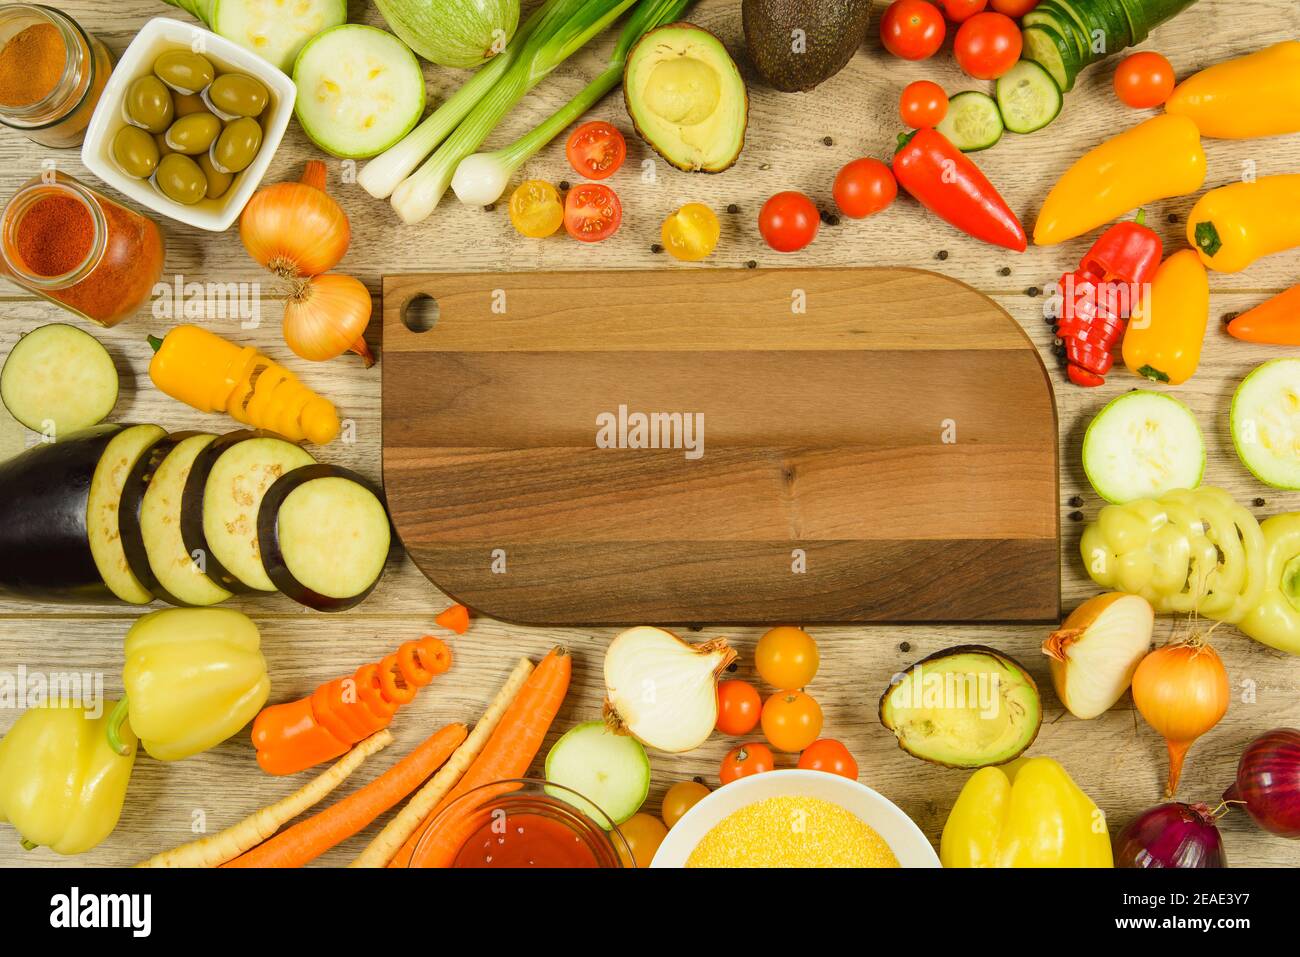 Cutting board in food vegetable frame. Stock Photo